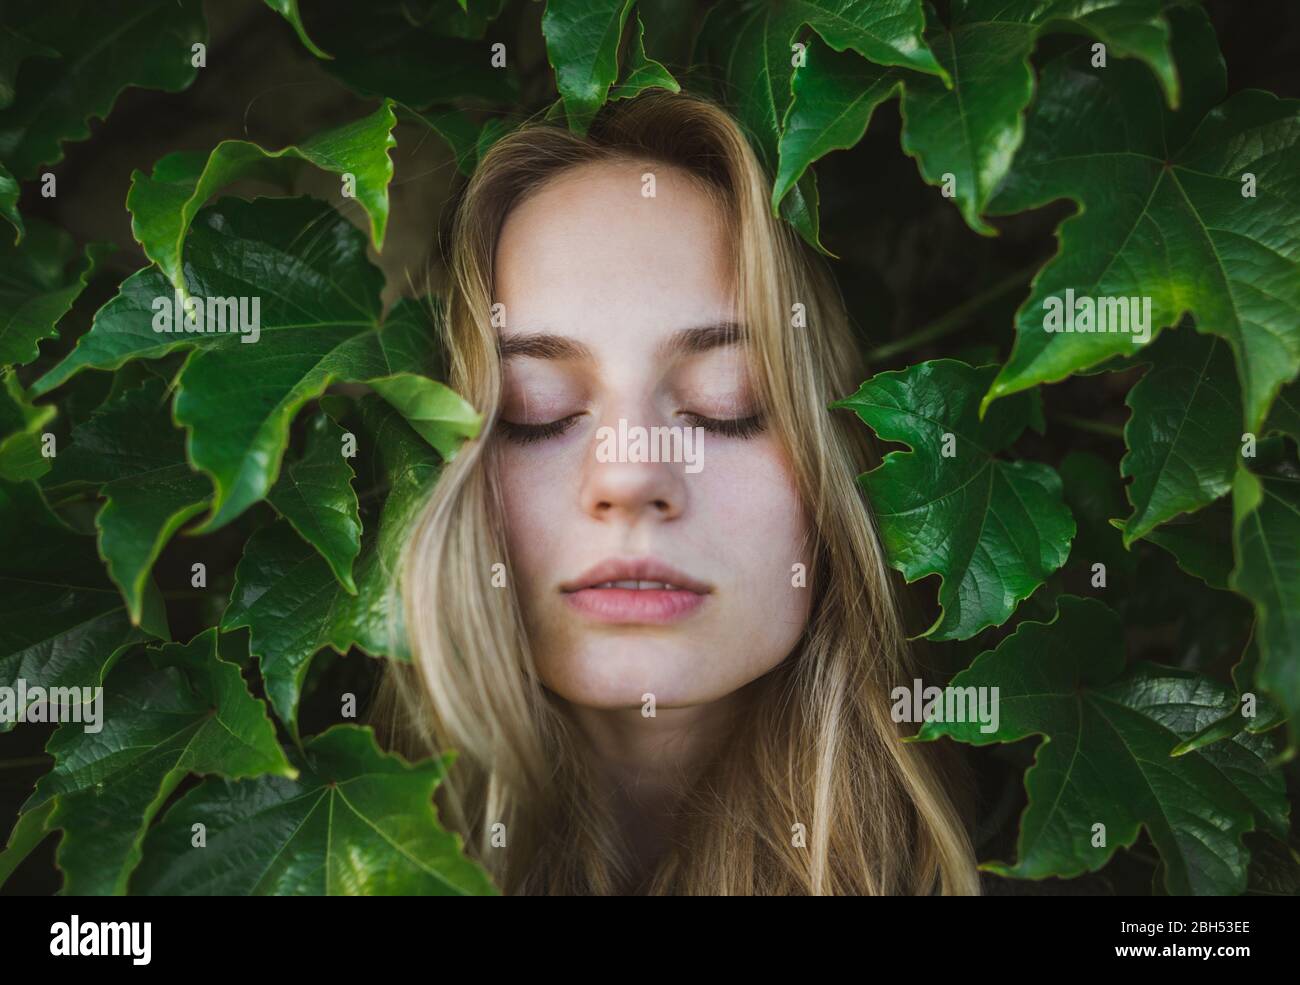 Woman with her eyes closed amongst leaves Stock Photo